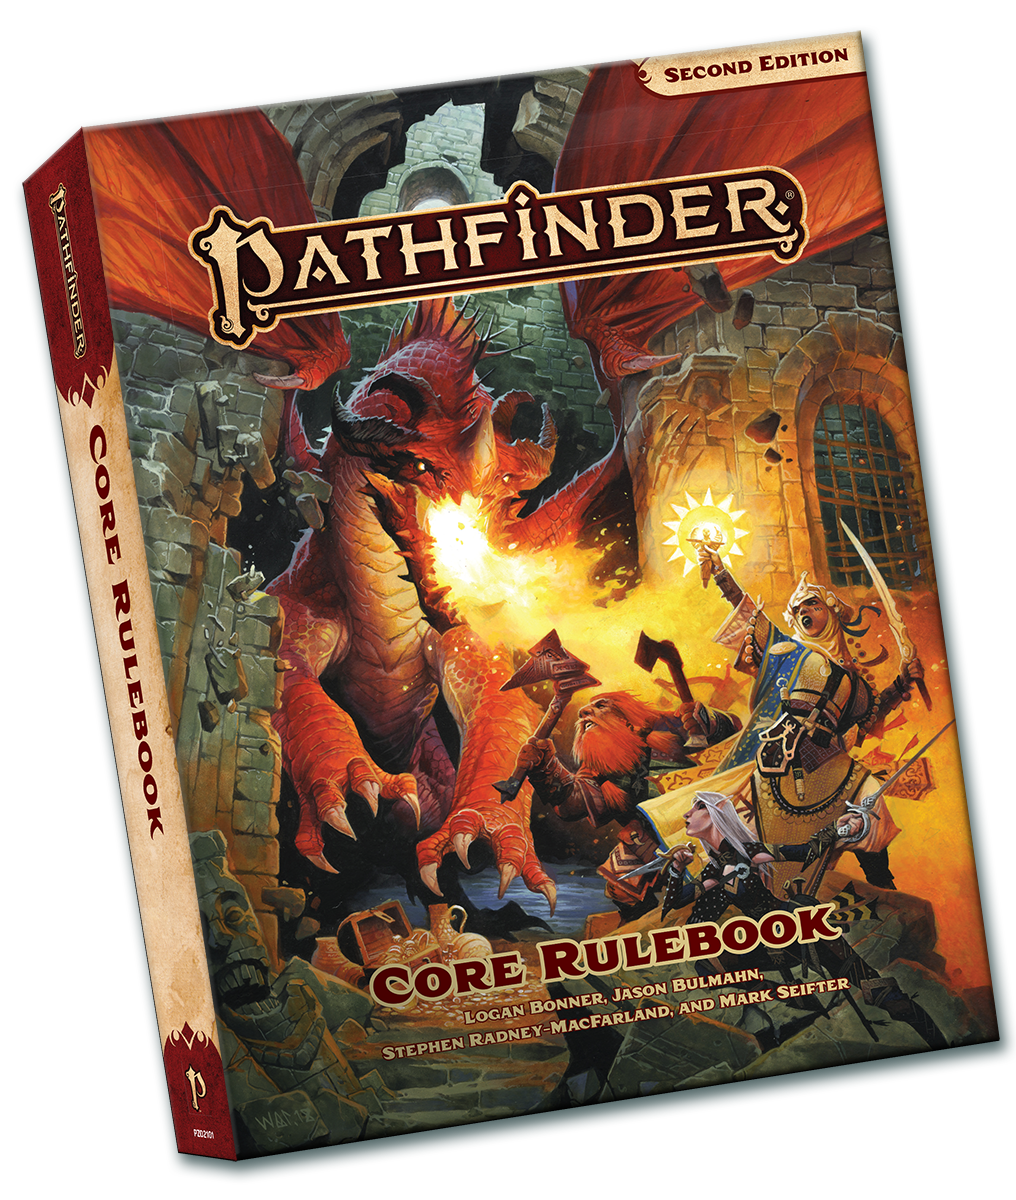 Core Rulebook Pocket Edition - Pathfinder Second Edition (2E) RPG